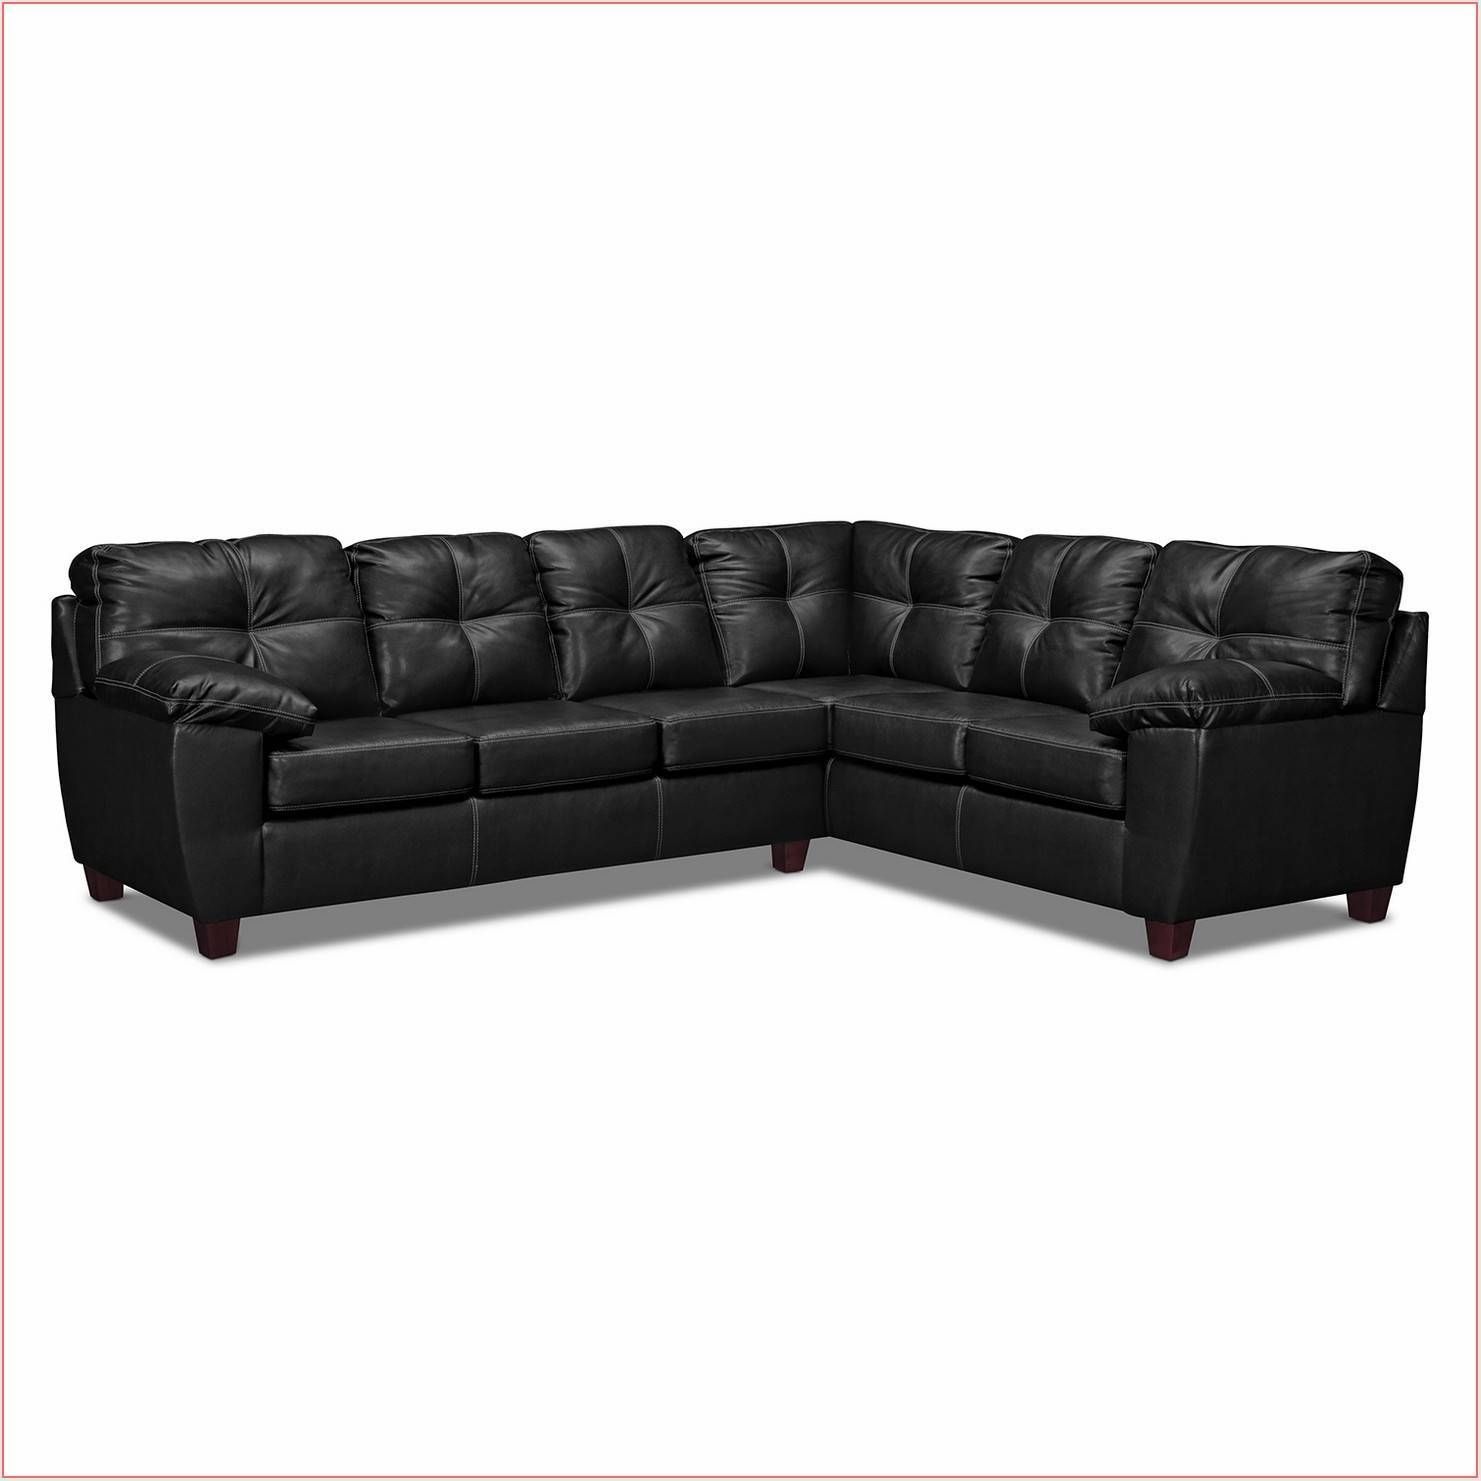 10 Piece Sectional Sofa Images – Reverse Search Intended For 10 Piece Sectional Sofa (Photo 145 of 299)